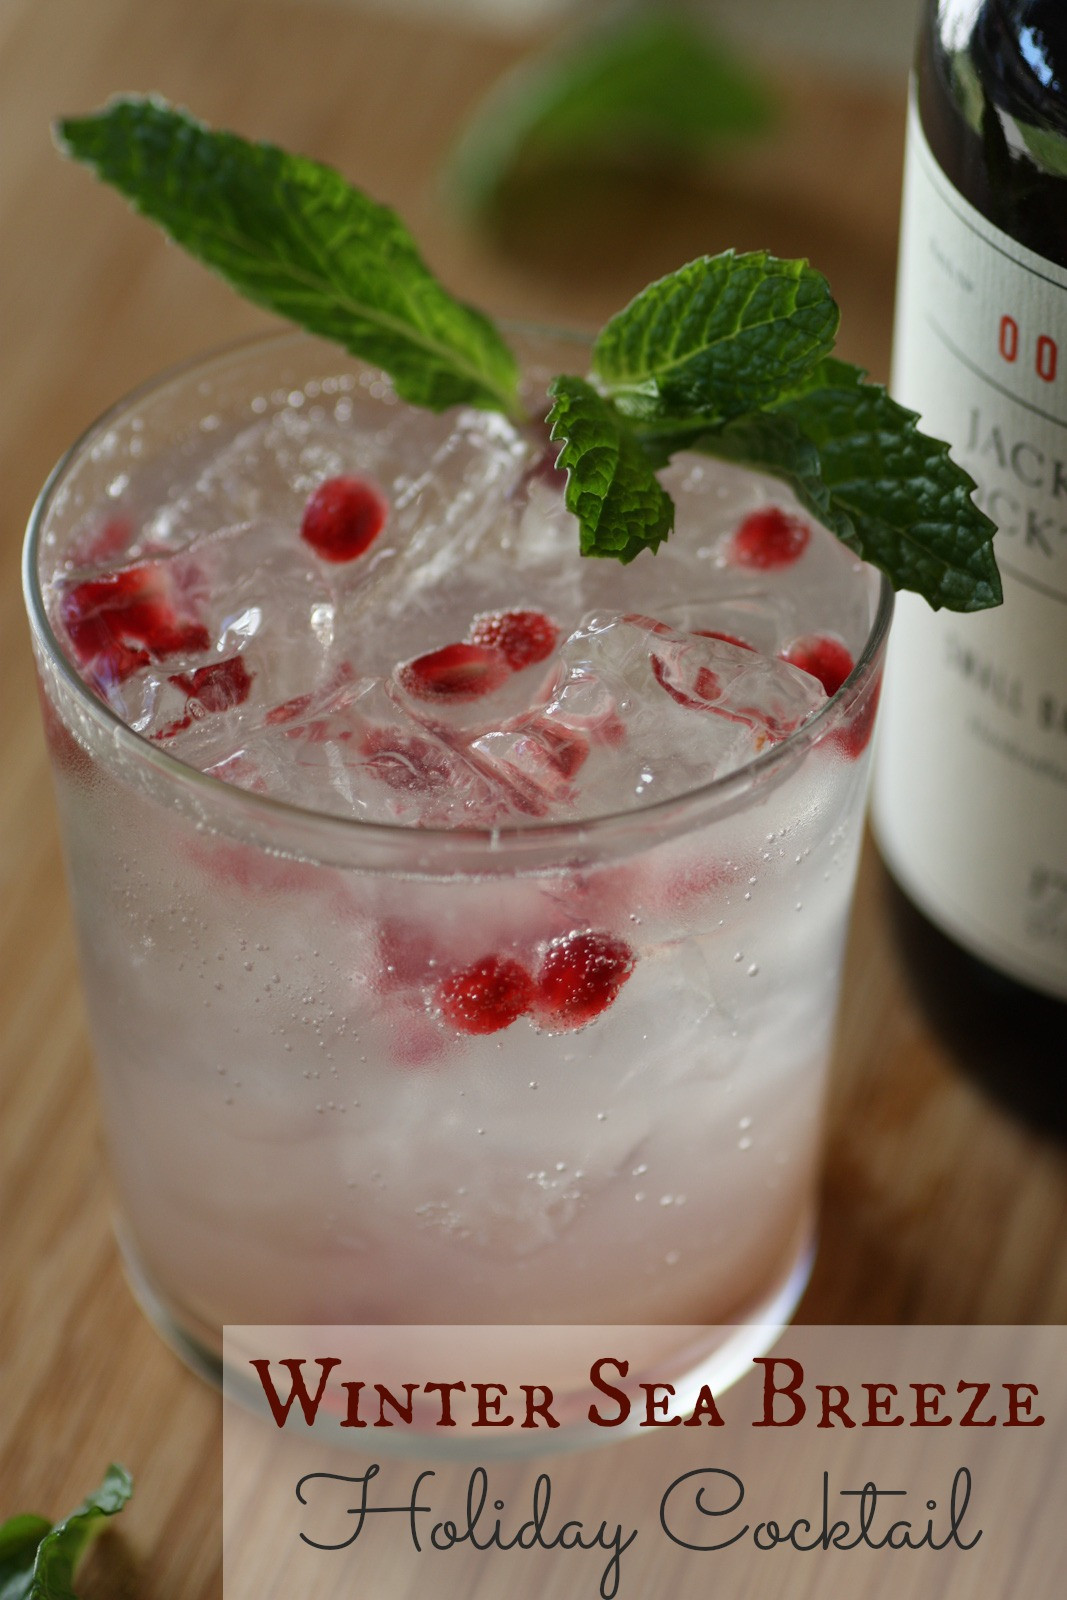 Winter Drinks With Vodka
 Make This Delicious Winter Sea Breeze Holiday Cocktail